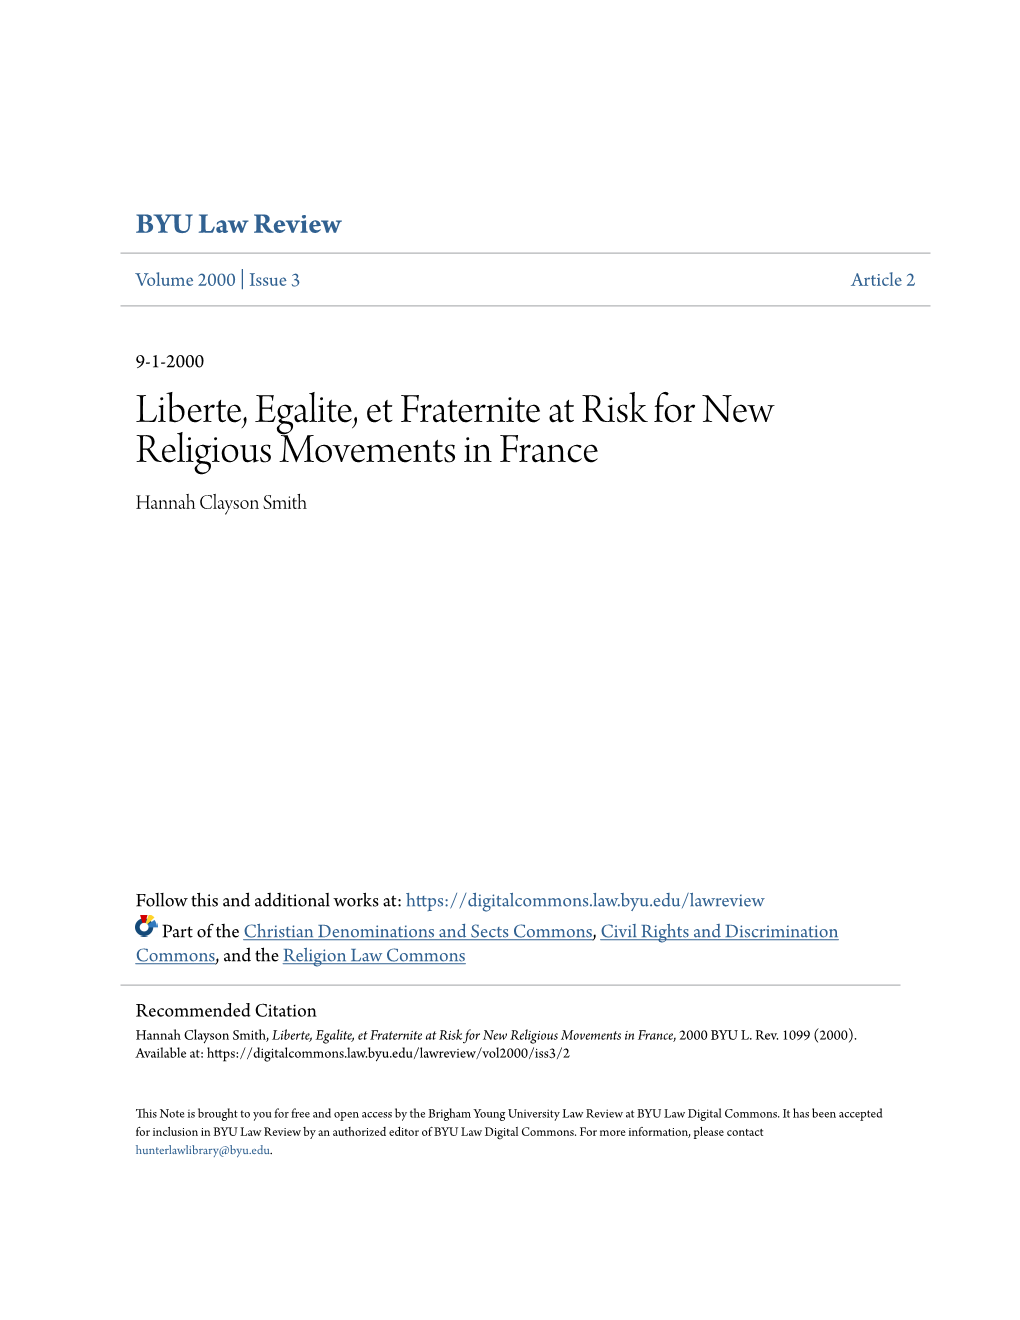 Liberte, Egalite, Et Fraternite at Risk for New Religious Movements in France Hannah Clayson Smith